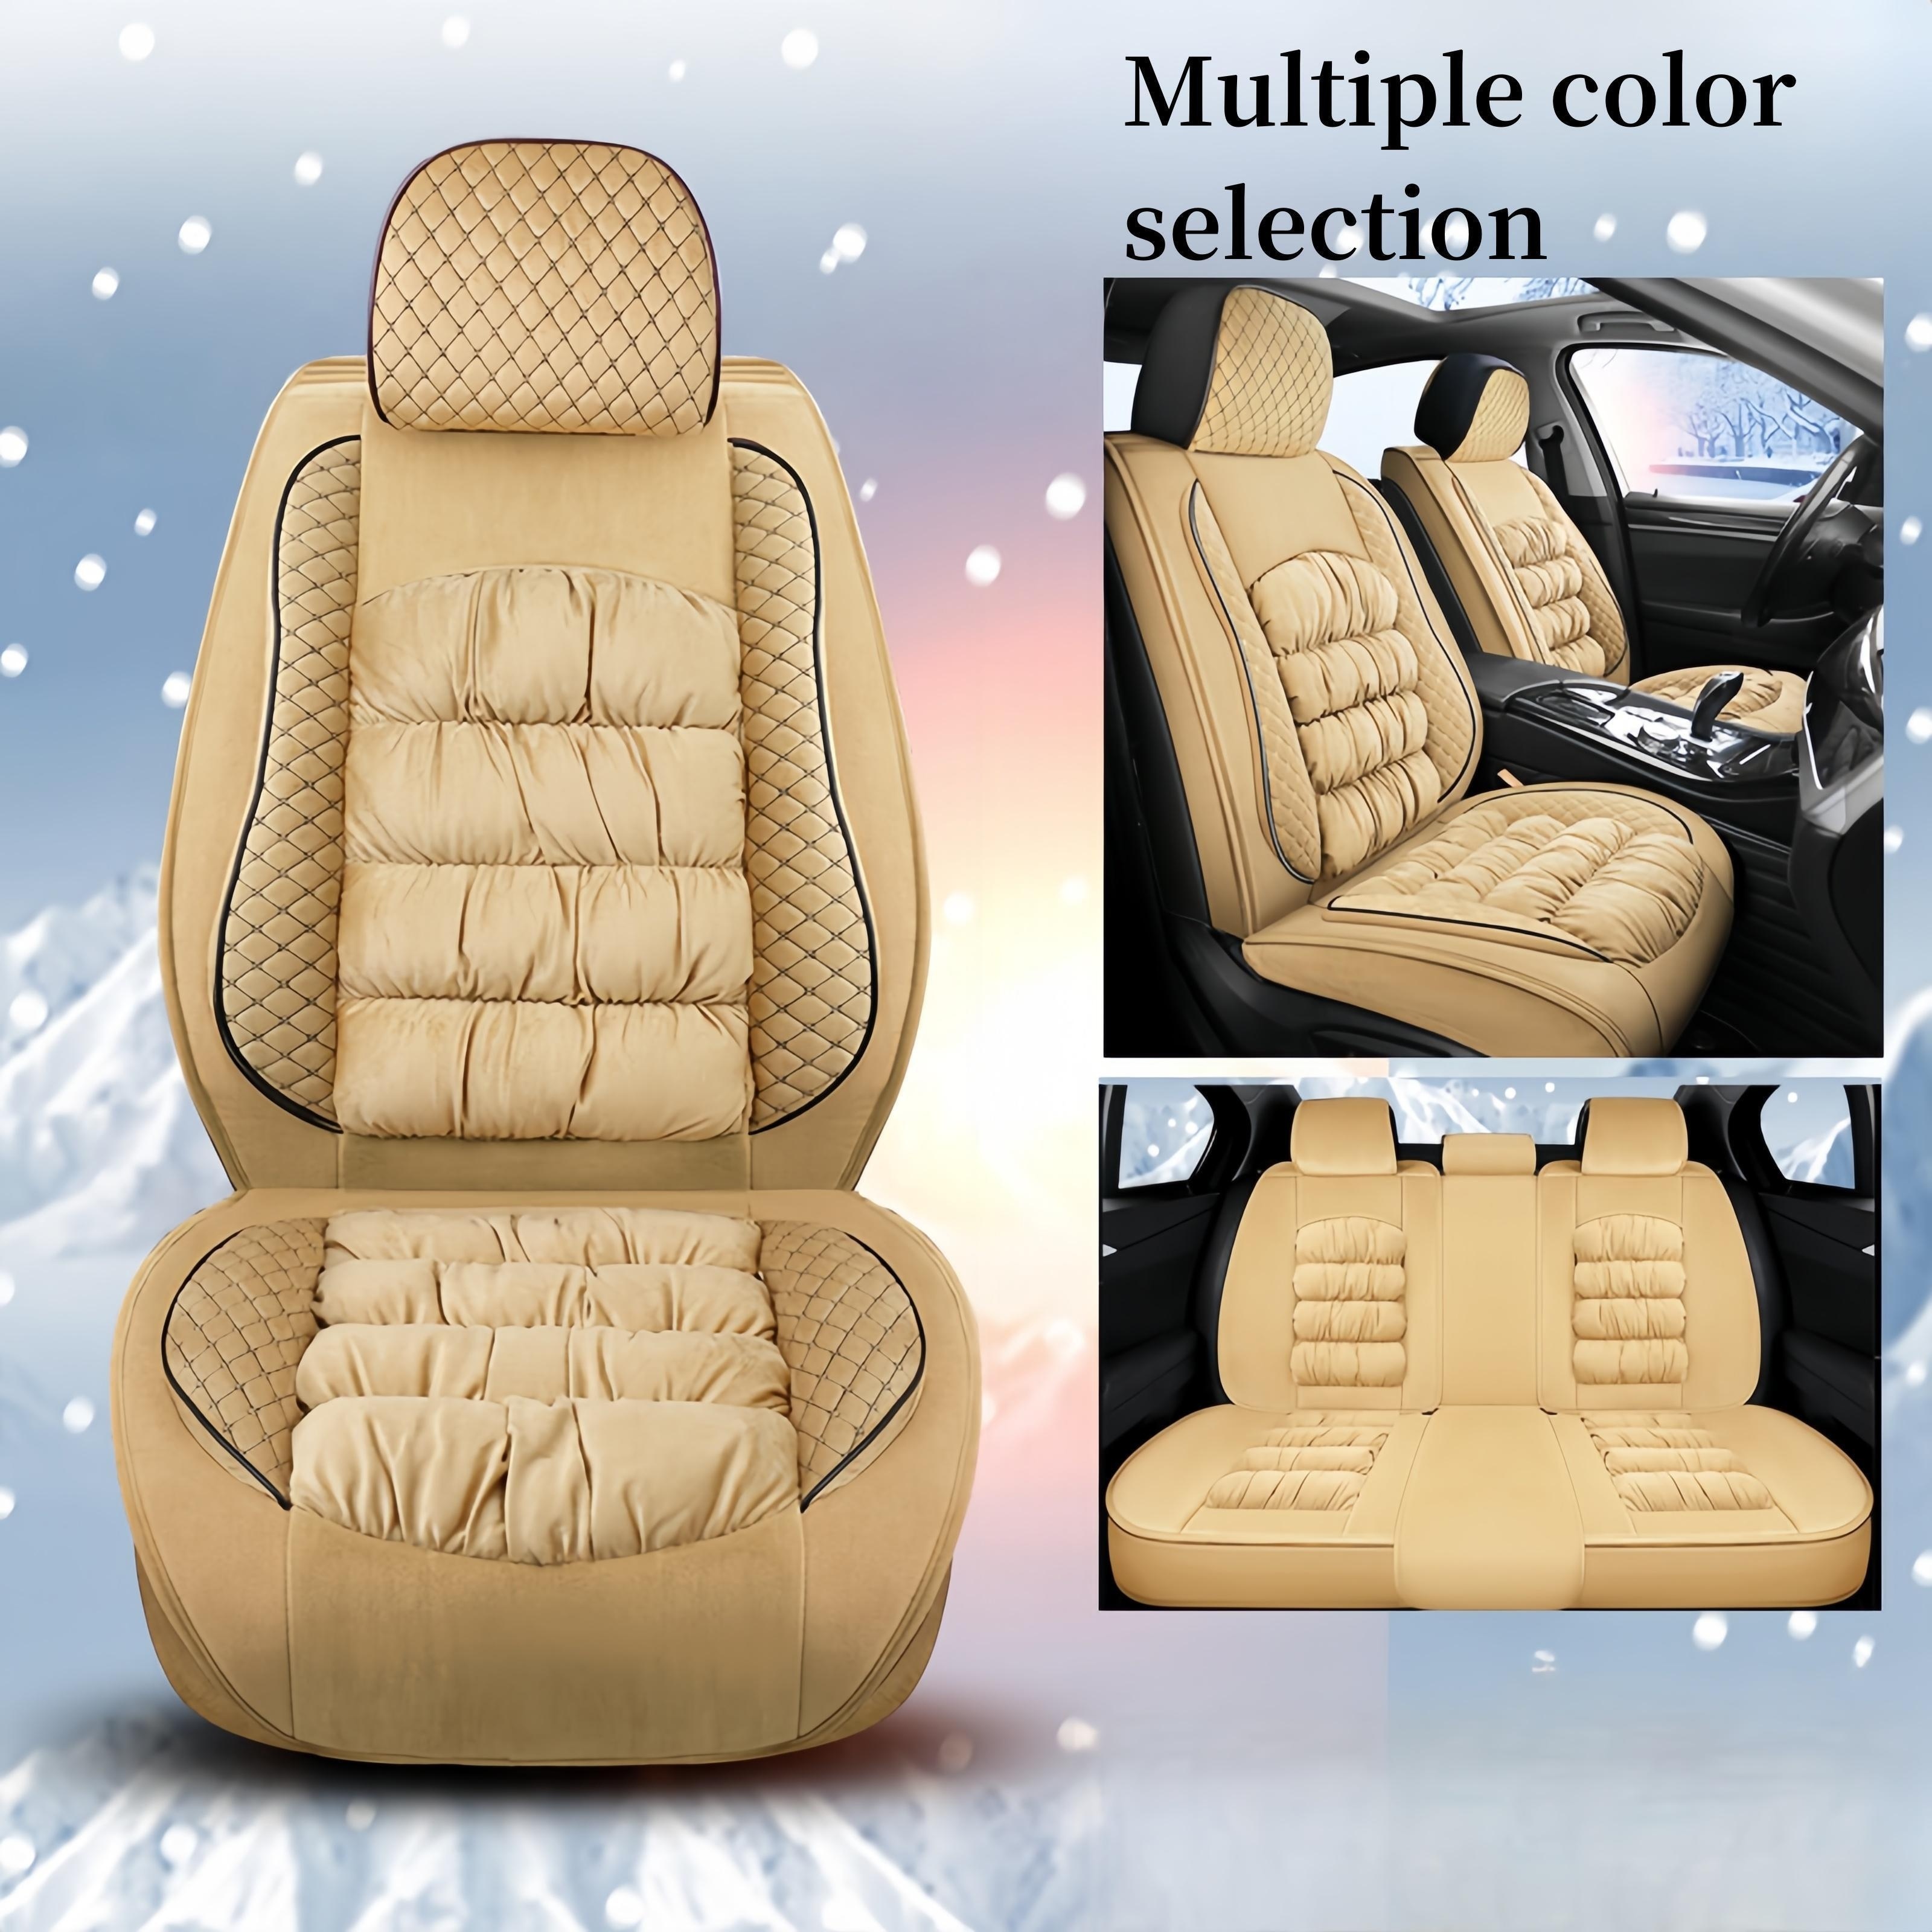 

5-seat Car Seat Covers, Comfortable Plush Seat Cover, Car Seat Cushion, 4 Seasons Universal Fully Wrapped Seat Protector